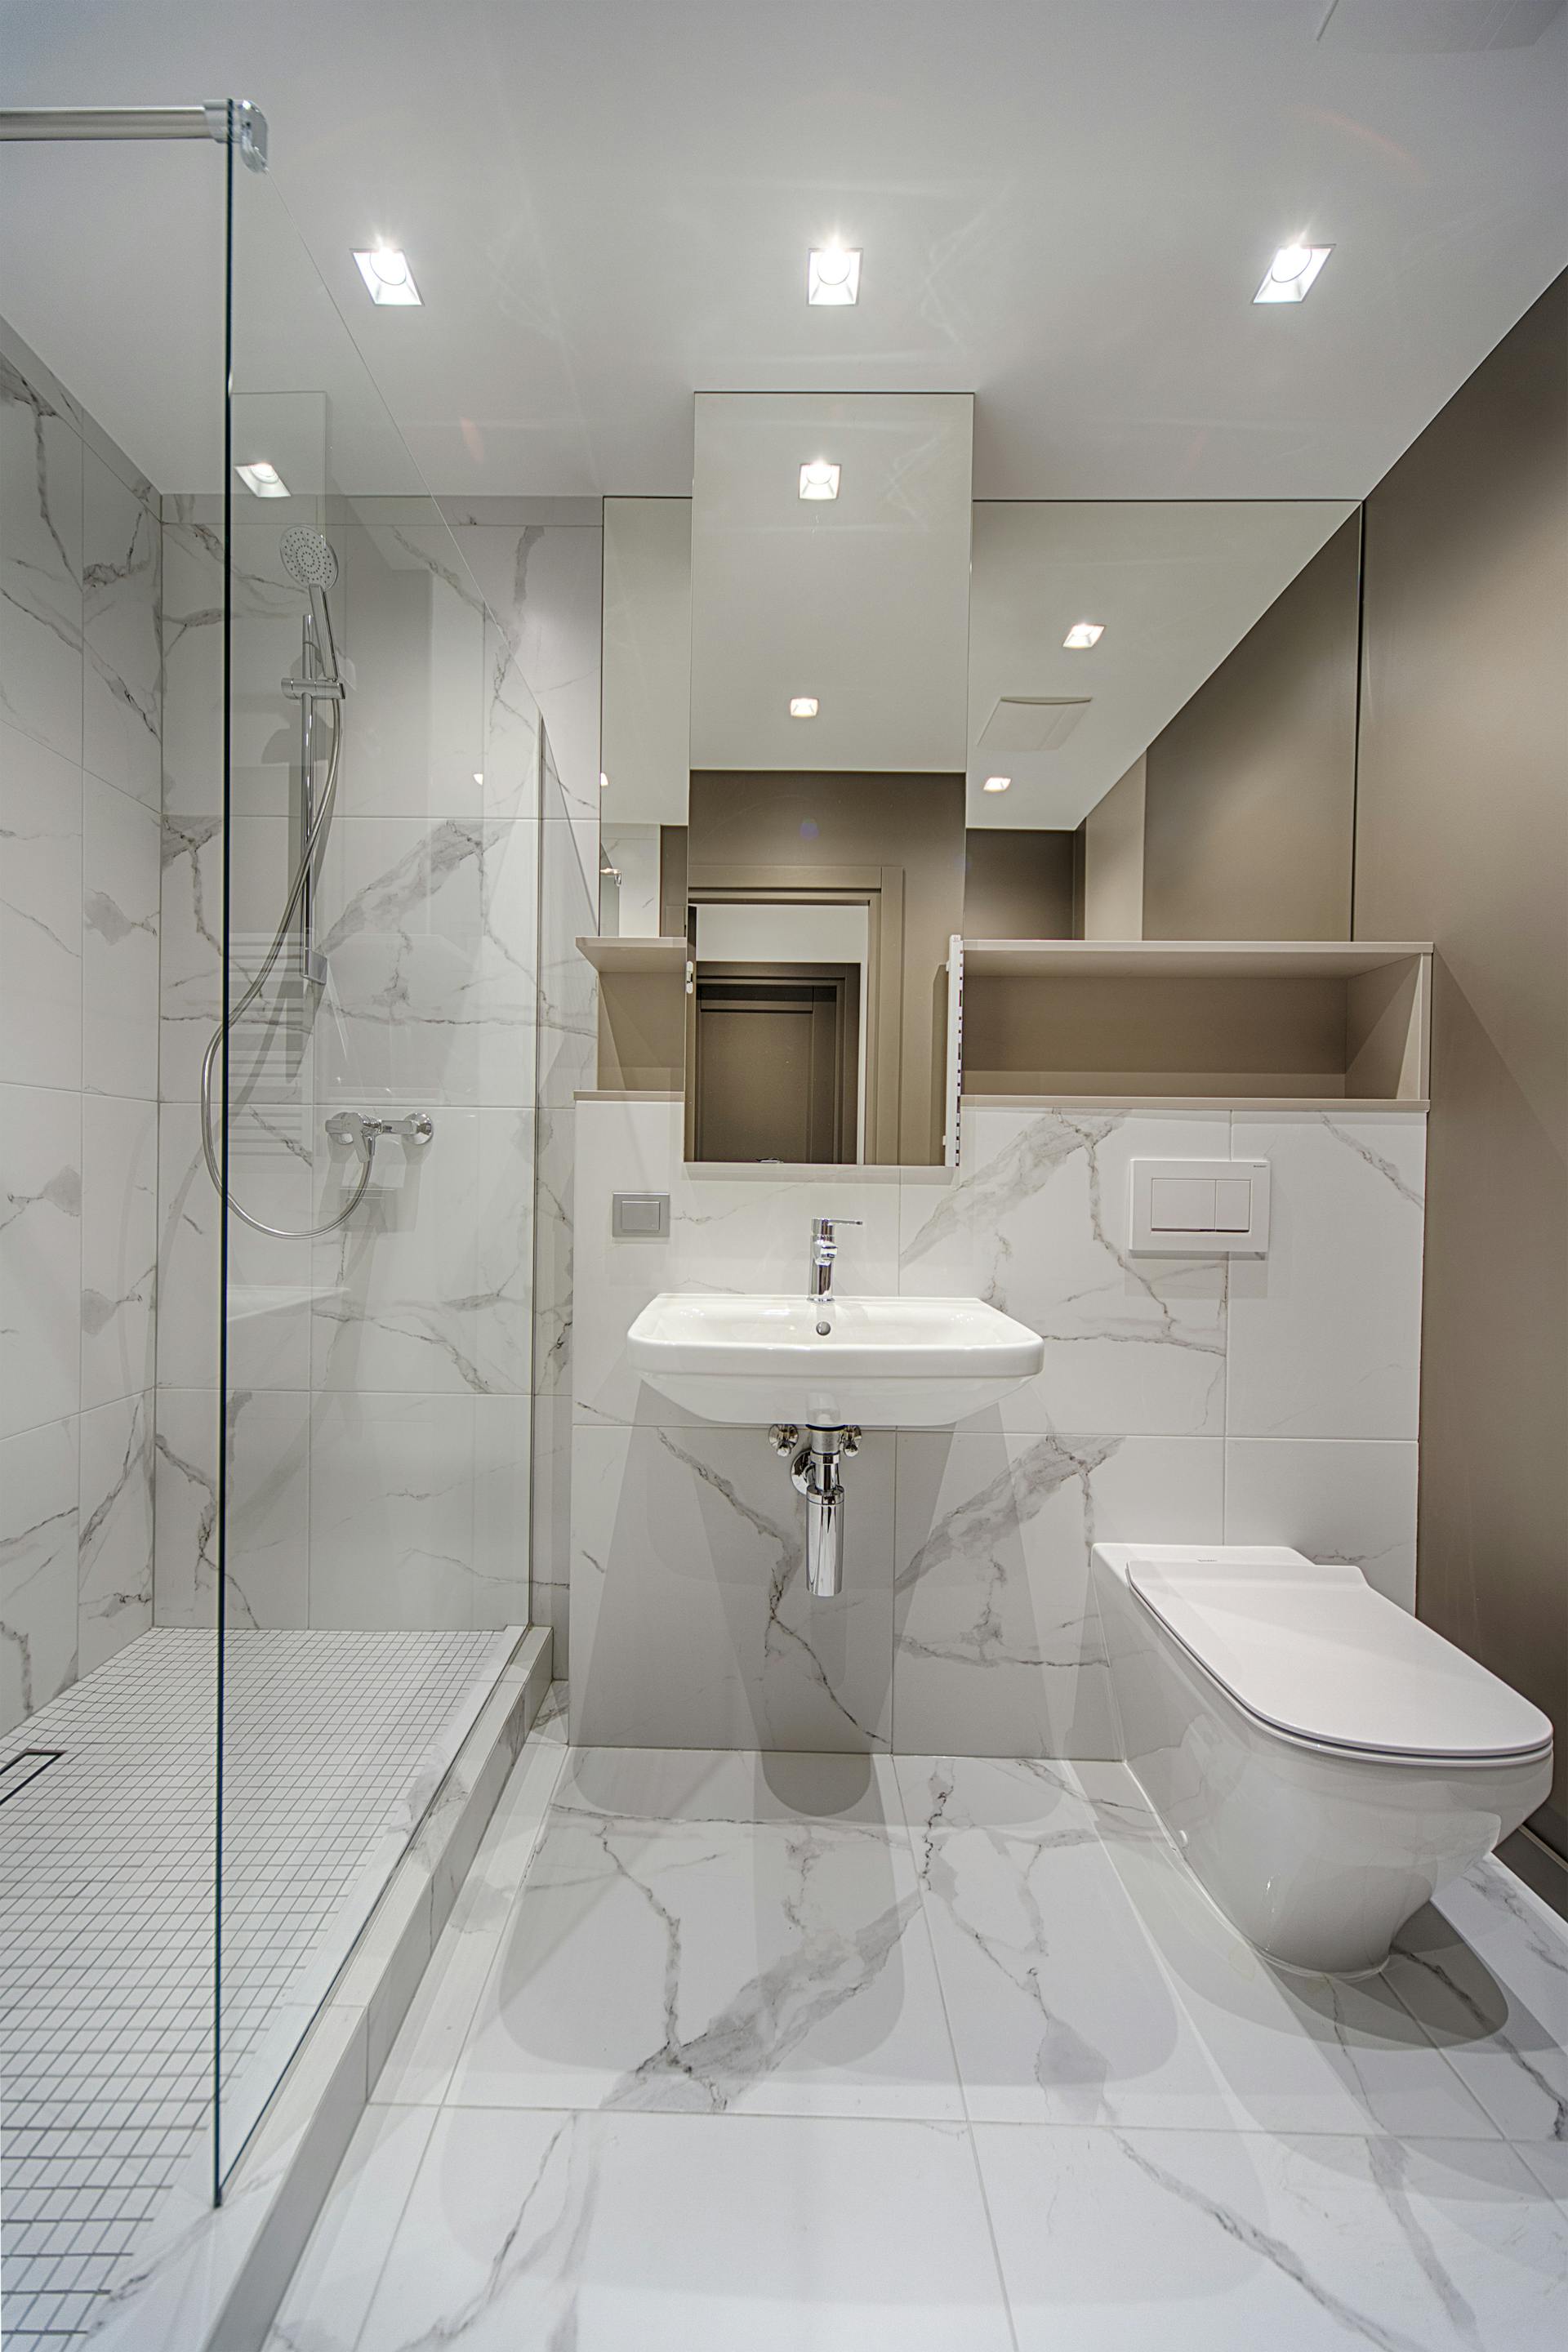 The marble interior of a bathroom with a wash basin and a toilet seat | Source: Pexels